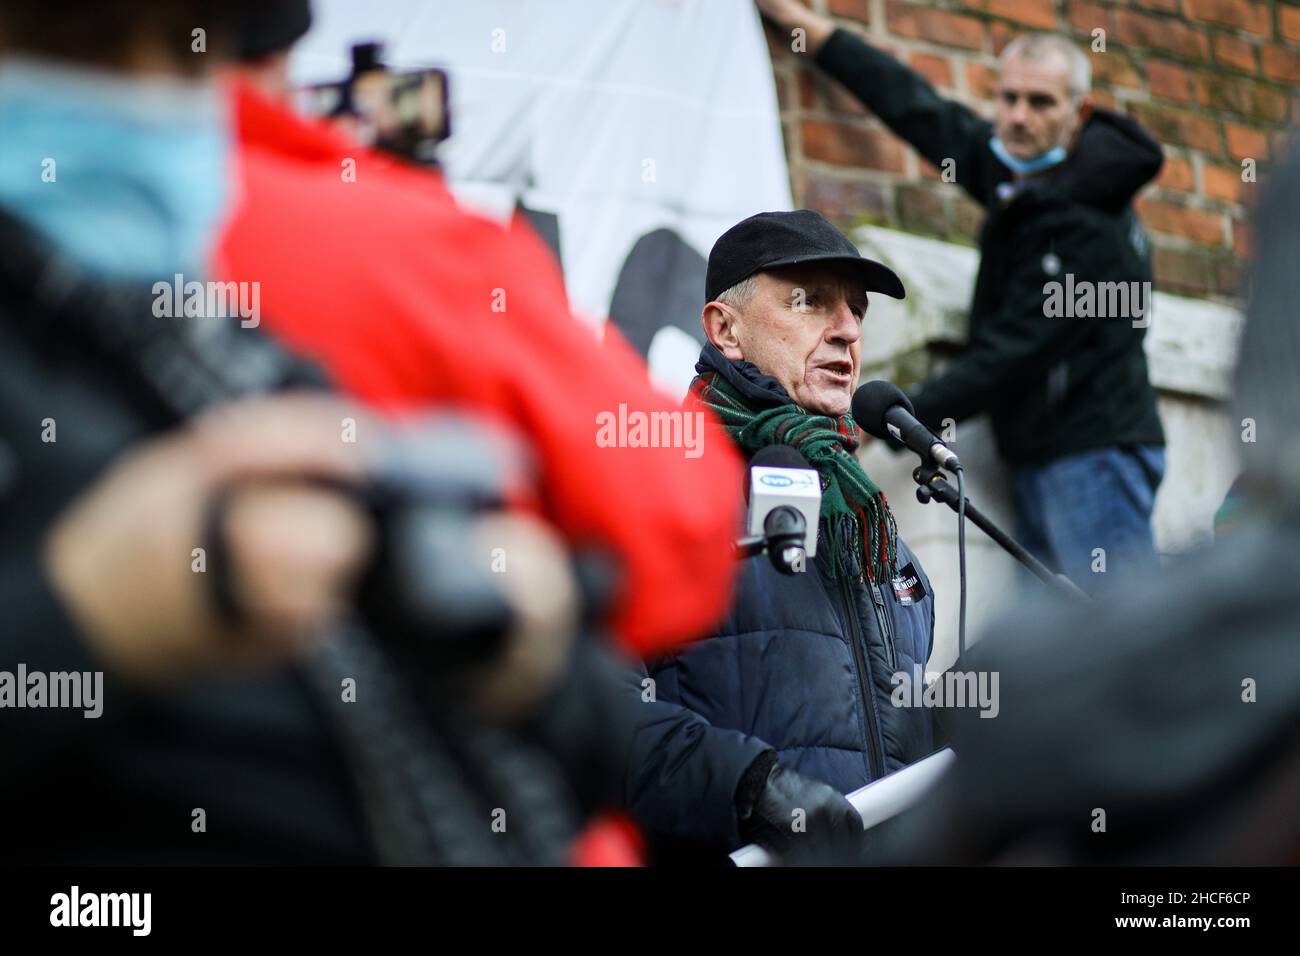 Opposition MP Bogdan Klich and ex minister of defense speaks during the protest.  Poland's parliament recently passed a controversial law that would p Stock Photo